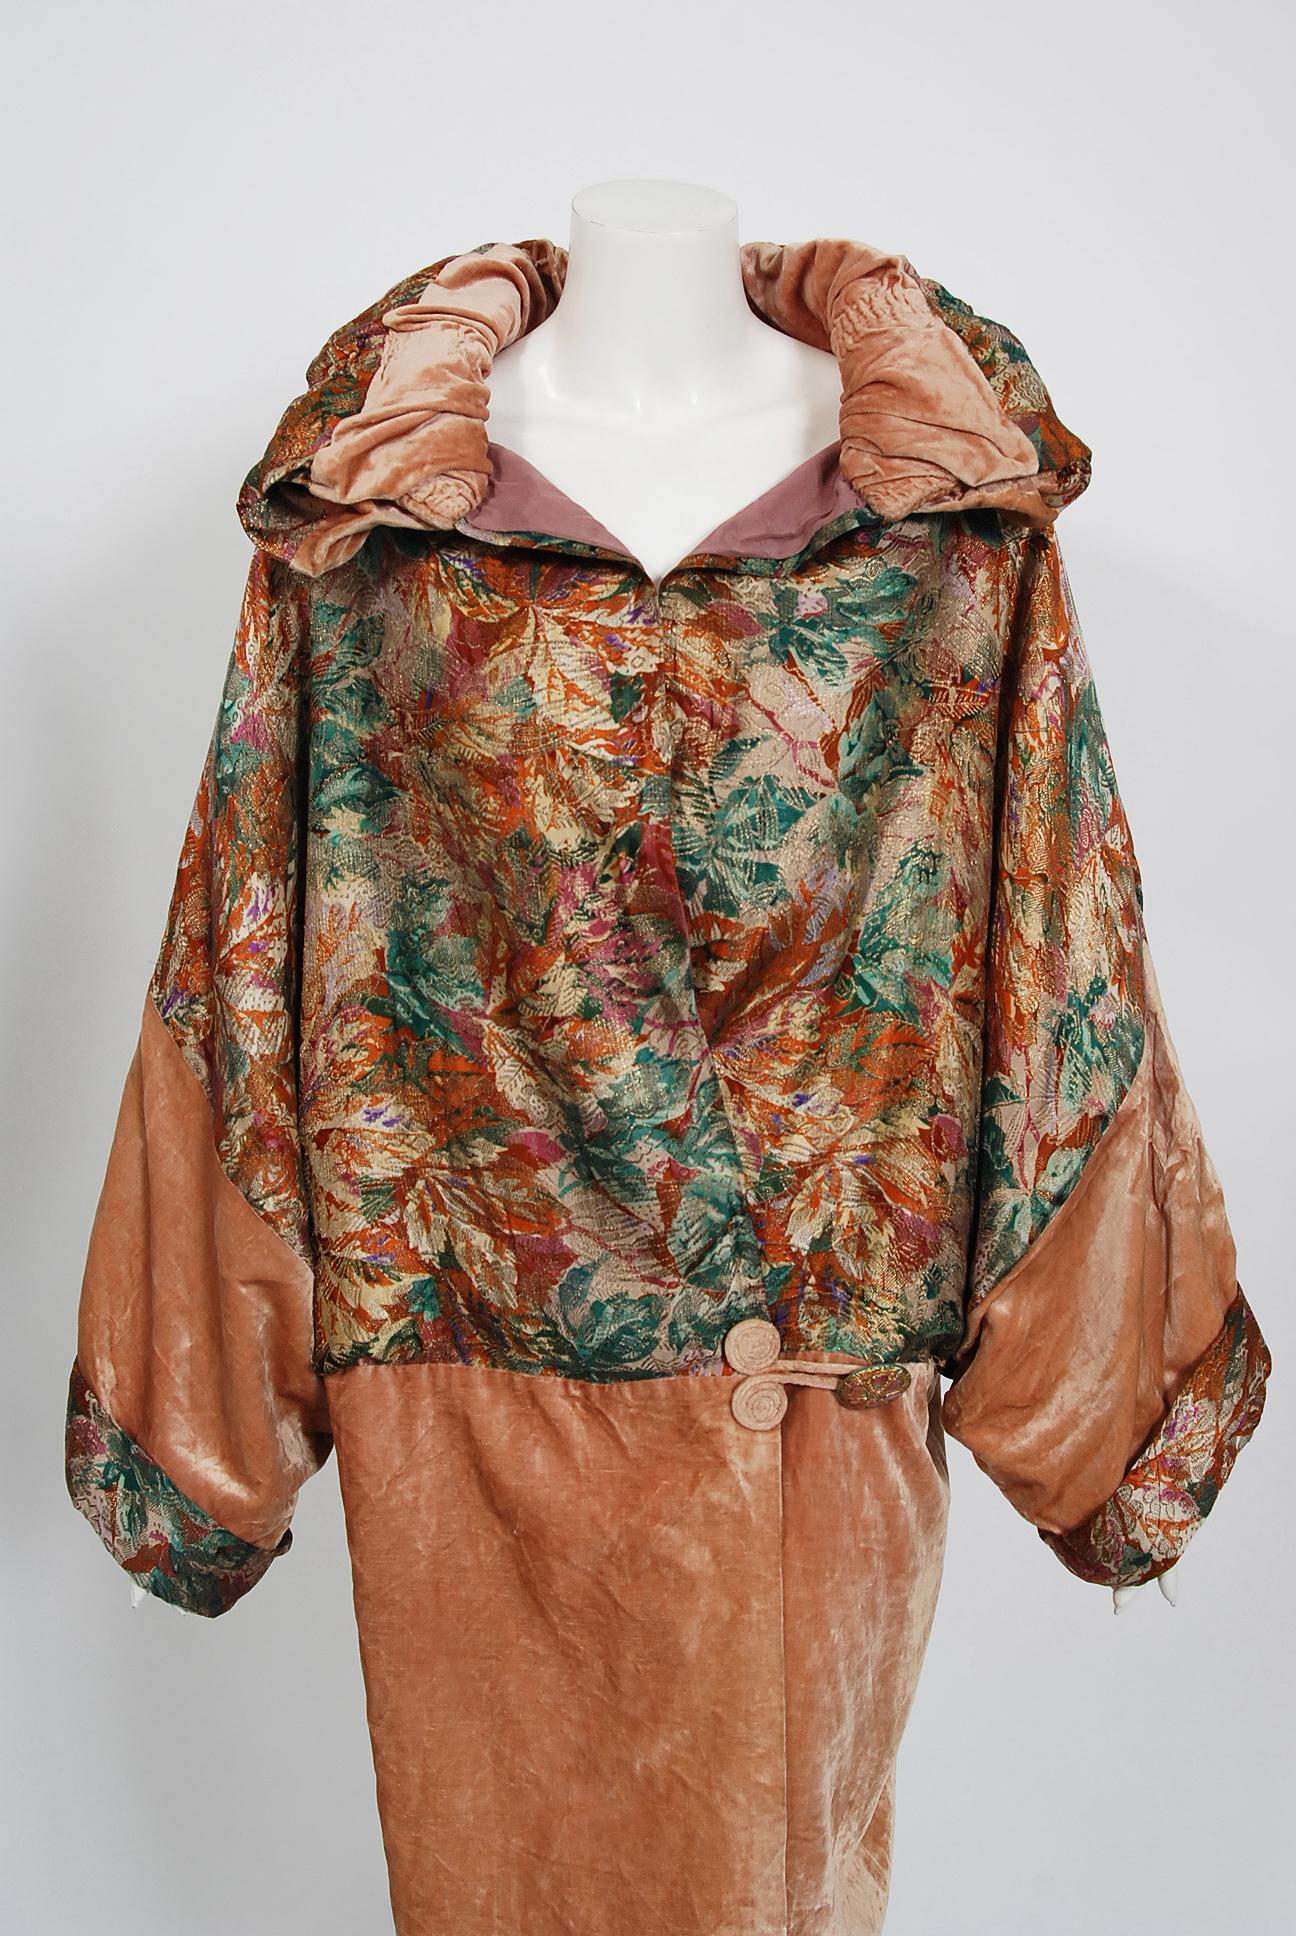 This breathtaking and unbelievable French metallic art-deco patterned metallic lamé & rose pink silk-velvet coat will make any woman shine. I love the wide sculpted dolman-sleeves and dramatic over-sized ruched portrait collar. The garment closes